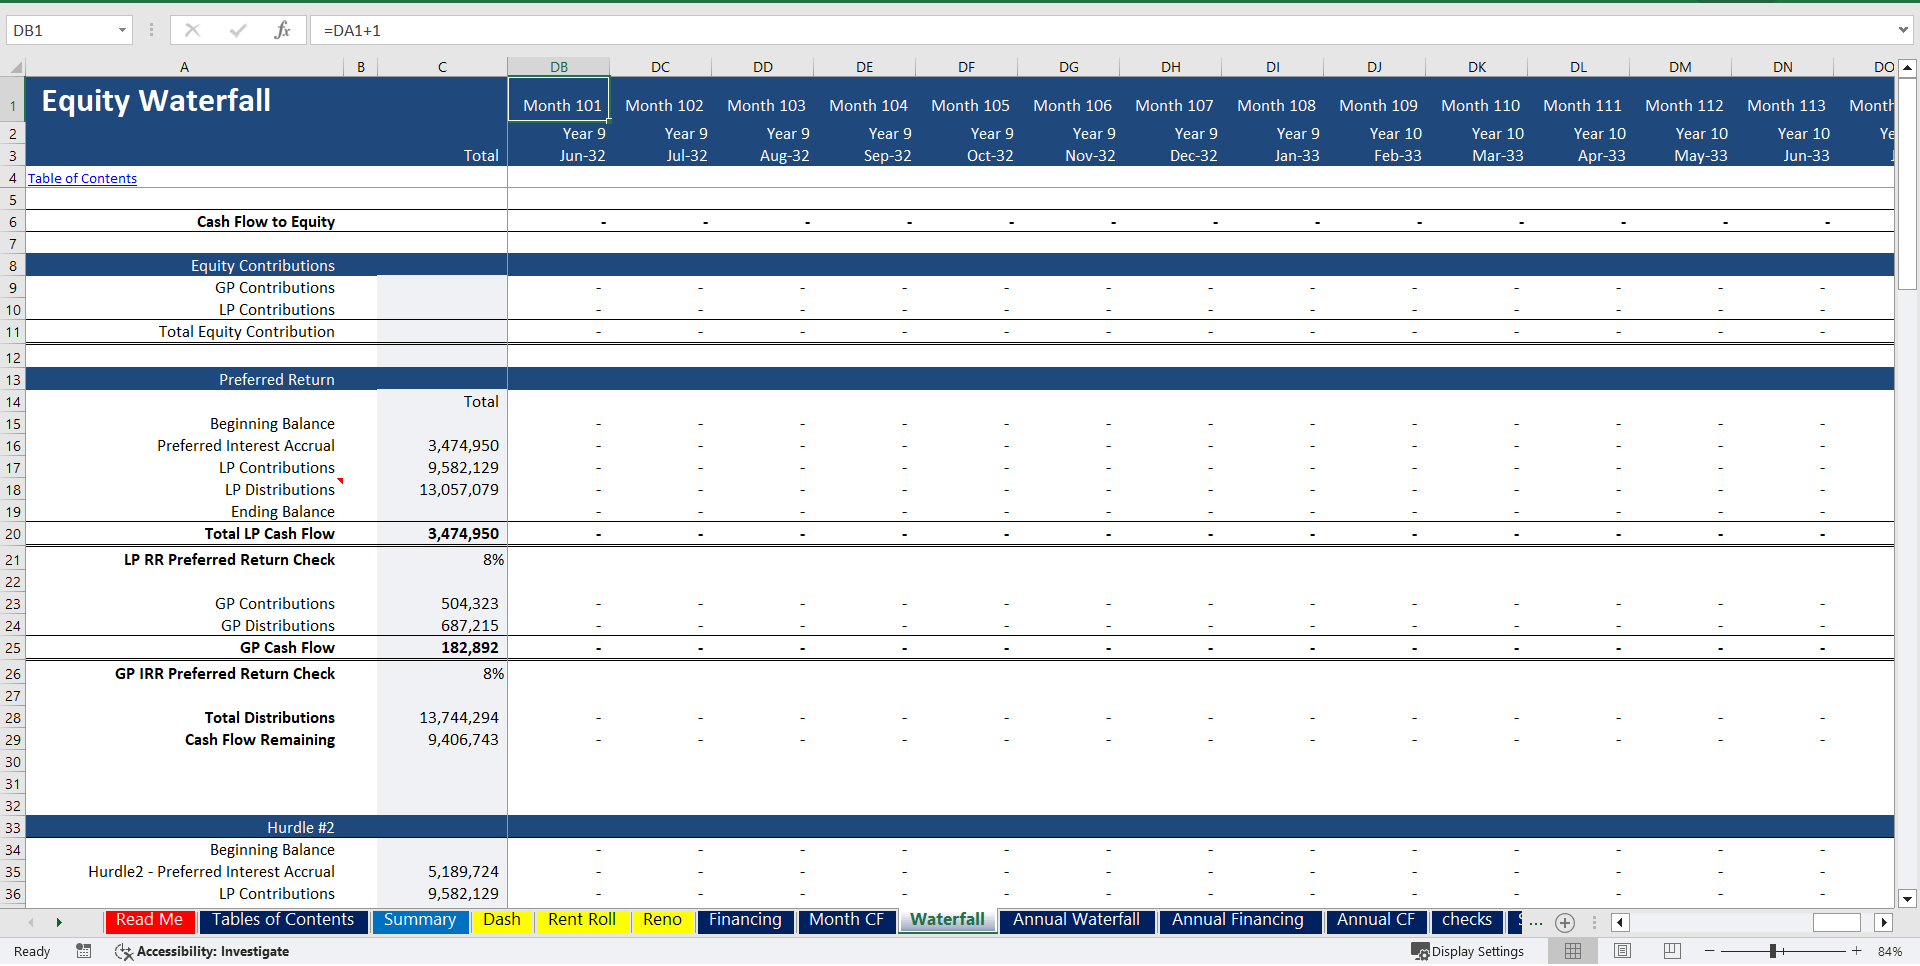 Real Estate Proforma - Value-Add Apartment Acquisition Model (Excel template (XLSM)) Preview Image